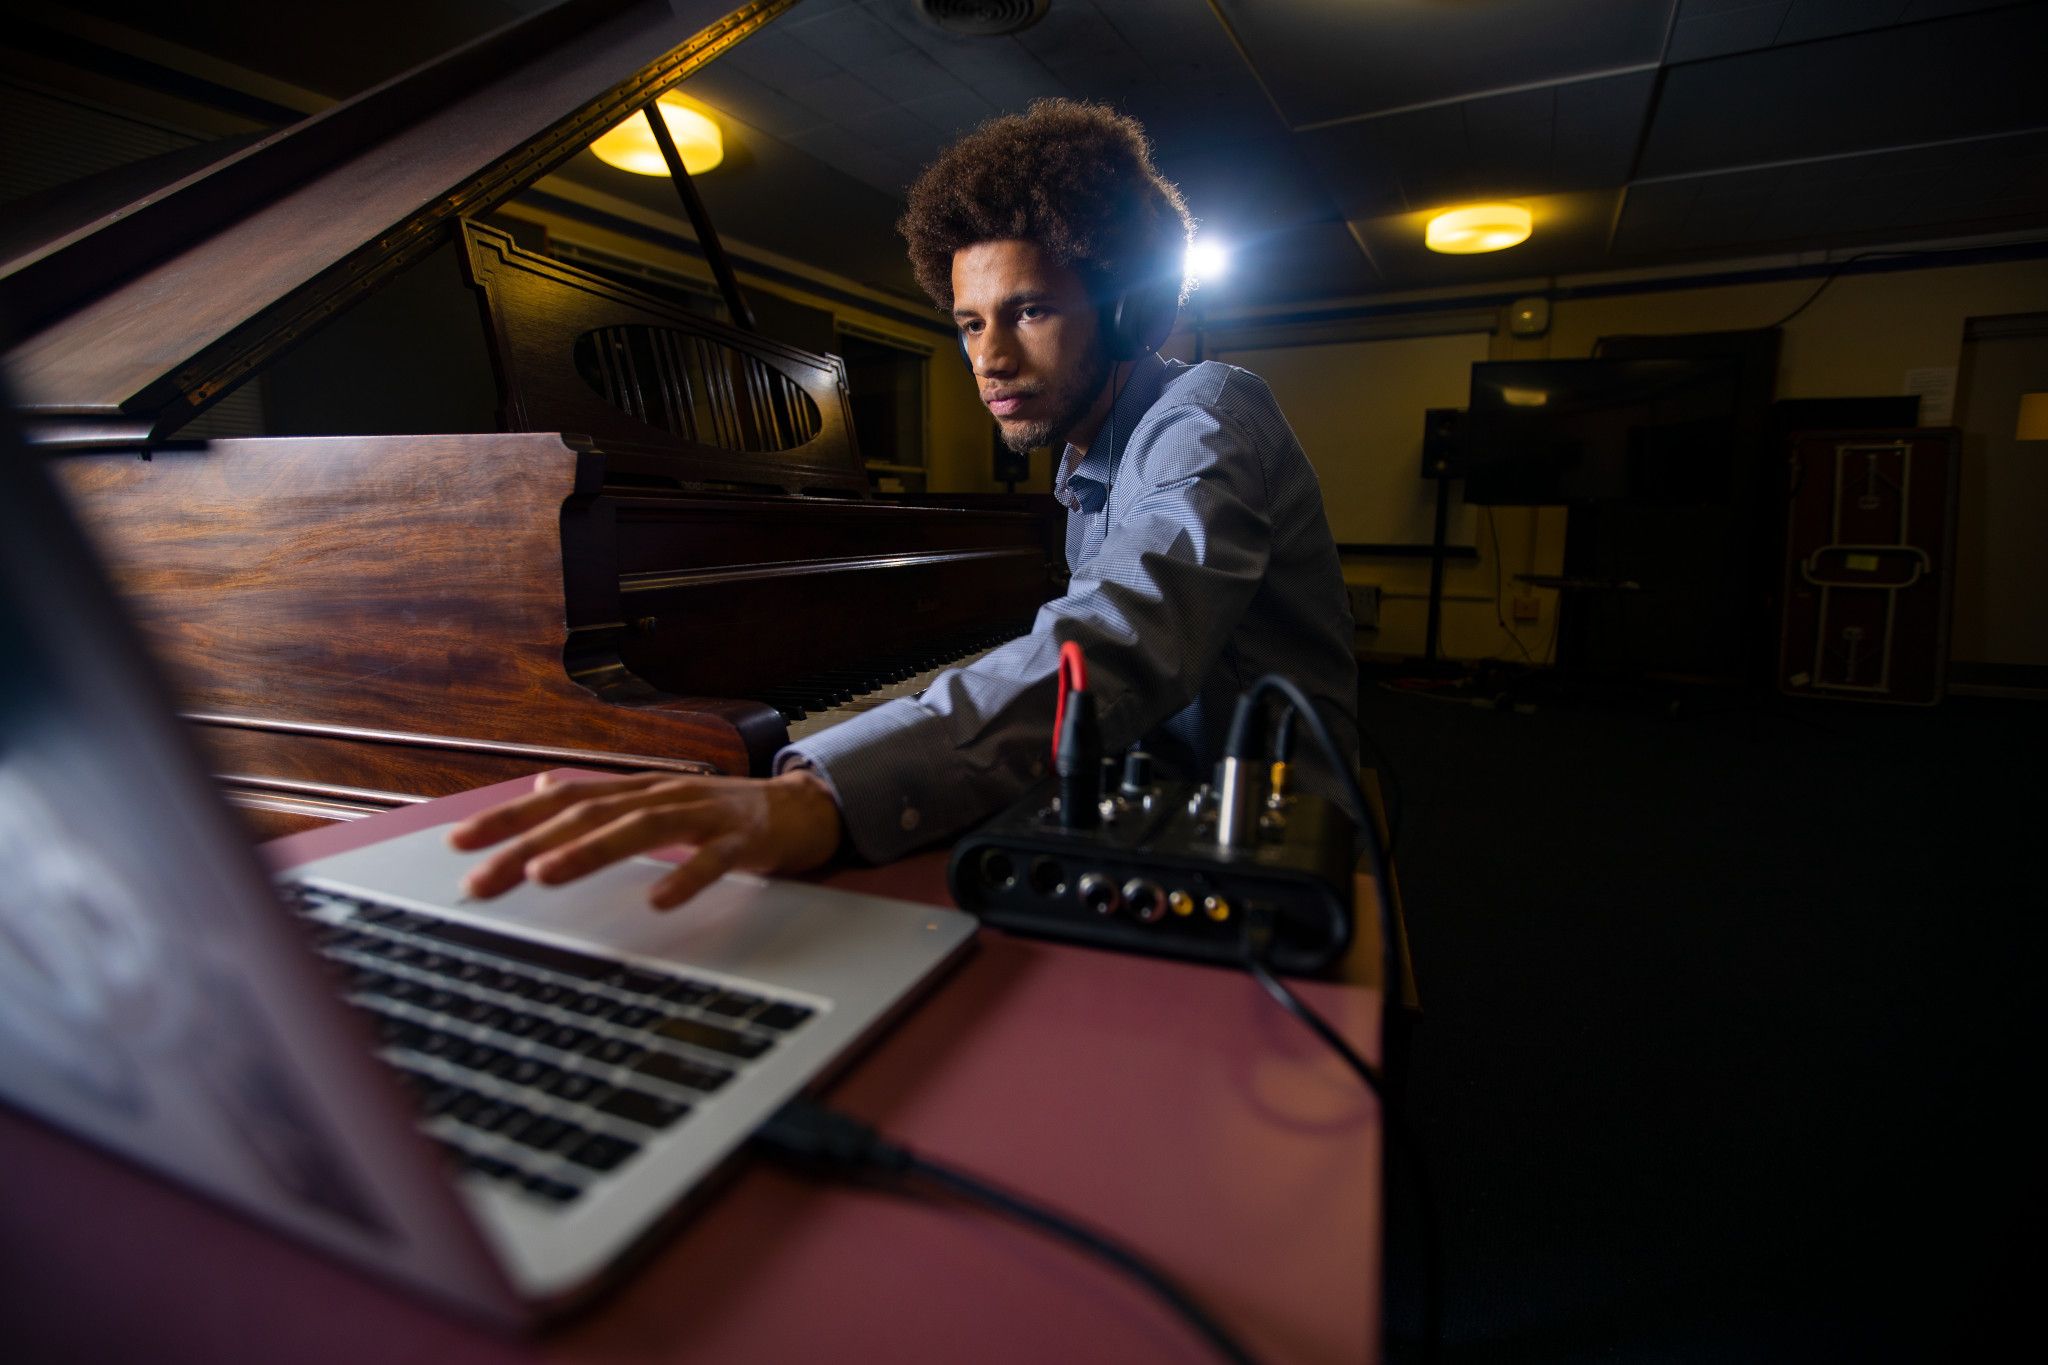 Student producing music